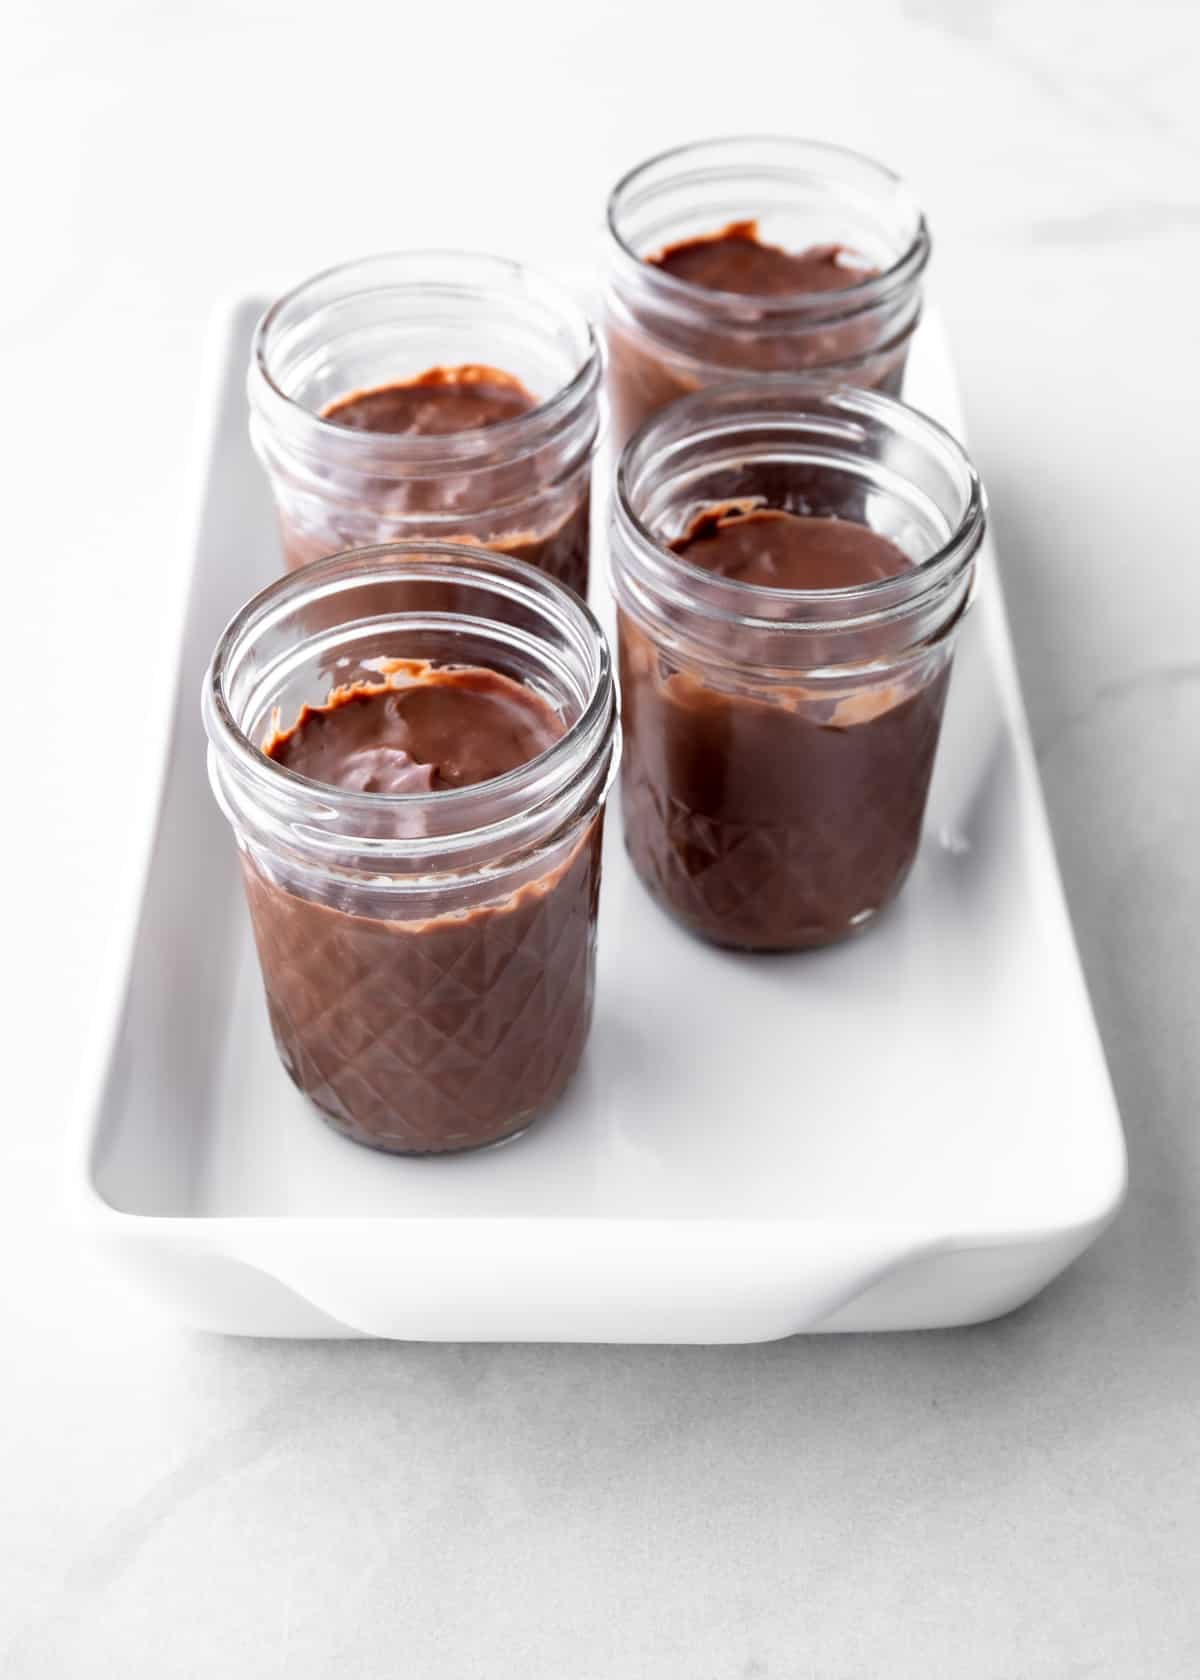 chocolate pudding in small glass jars in a white baking dish